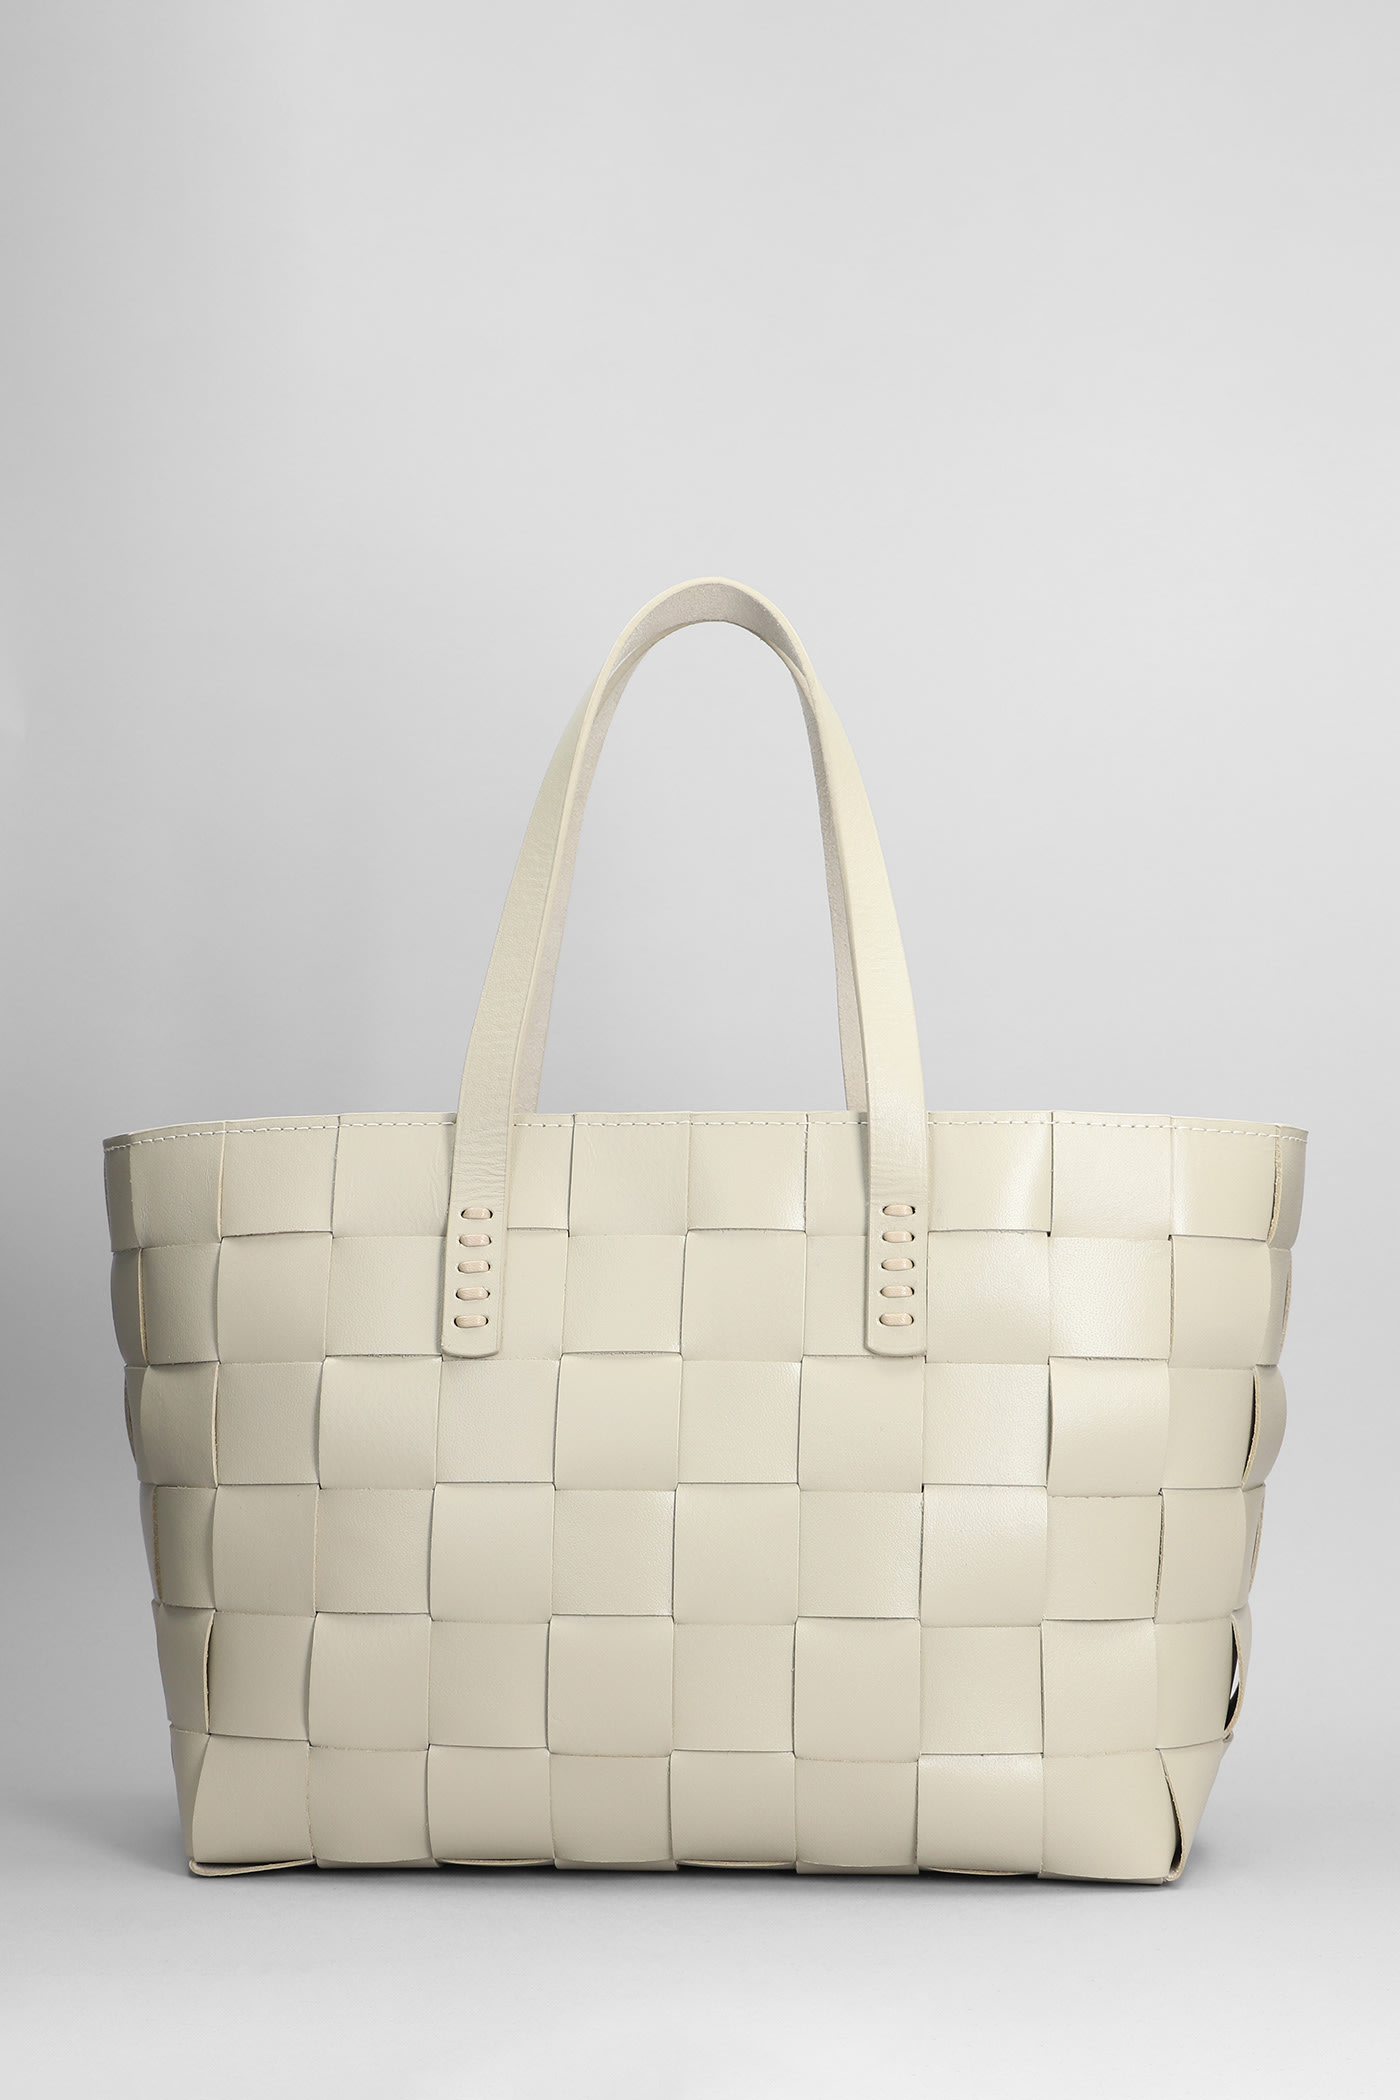 Japan Tote Tote In Beige Leather